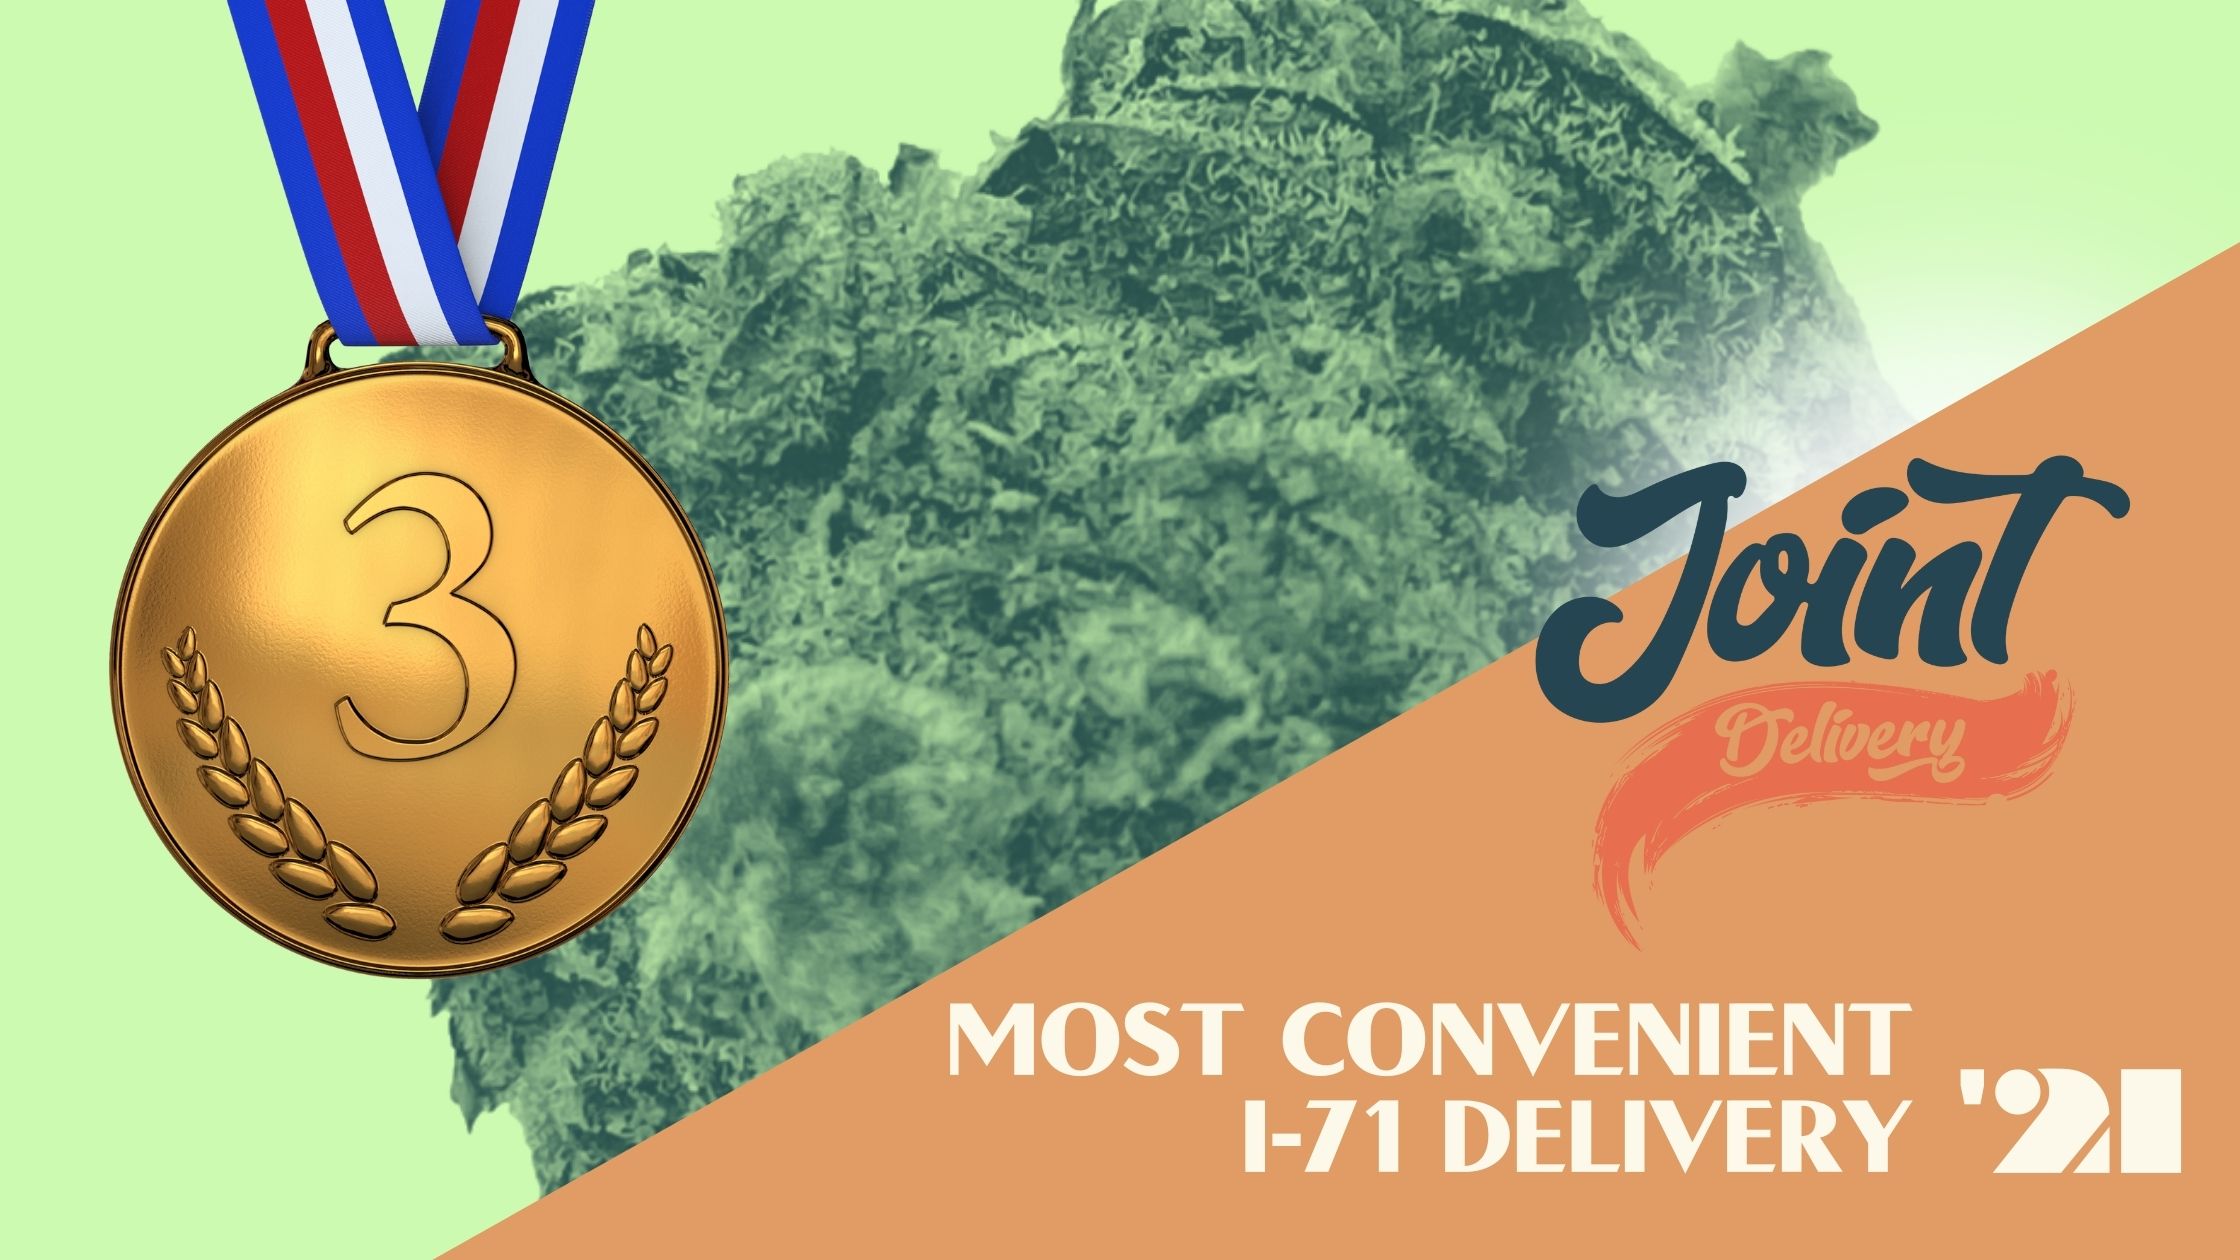 most convenient delivery 2021 joint delivery